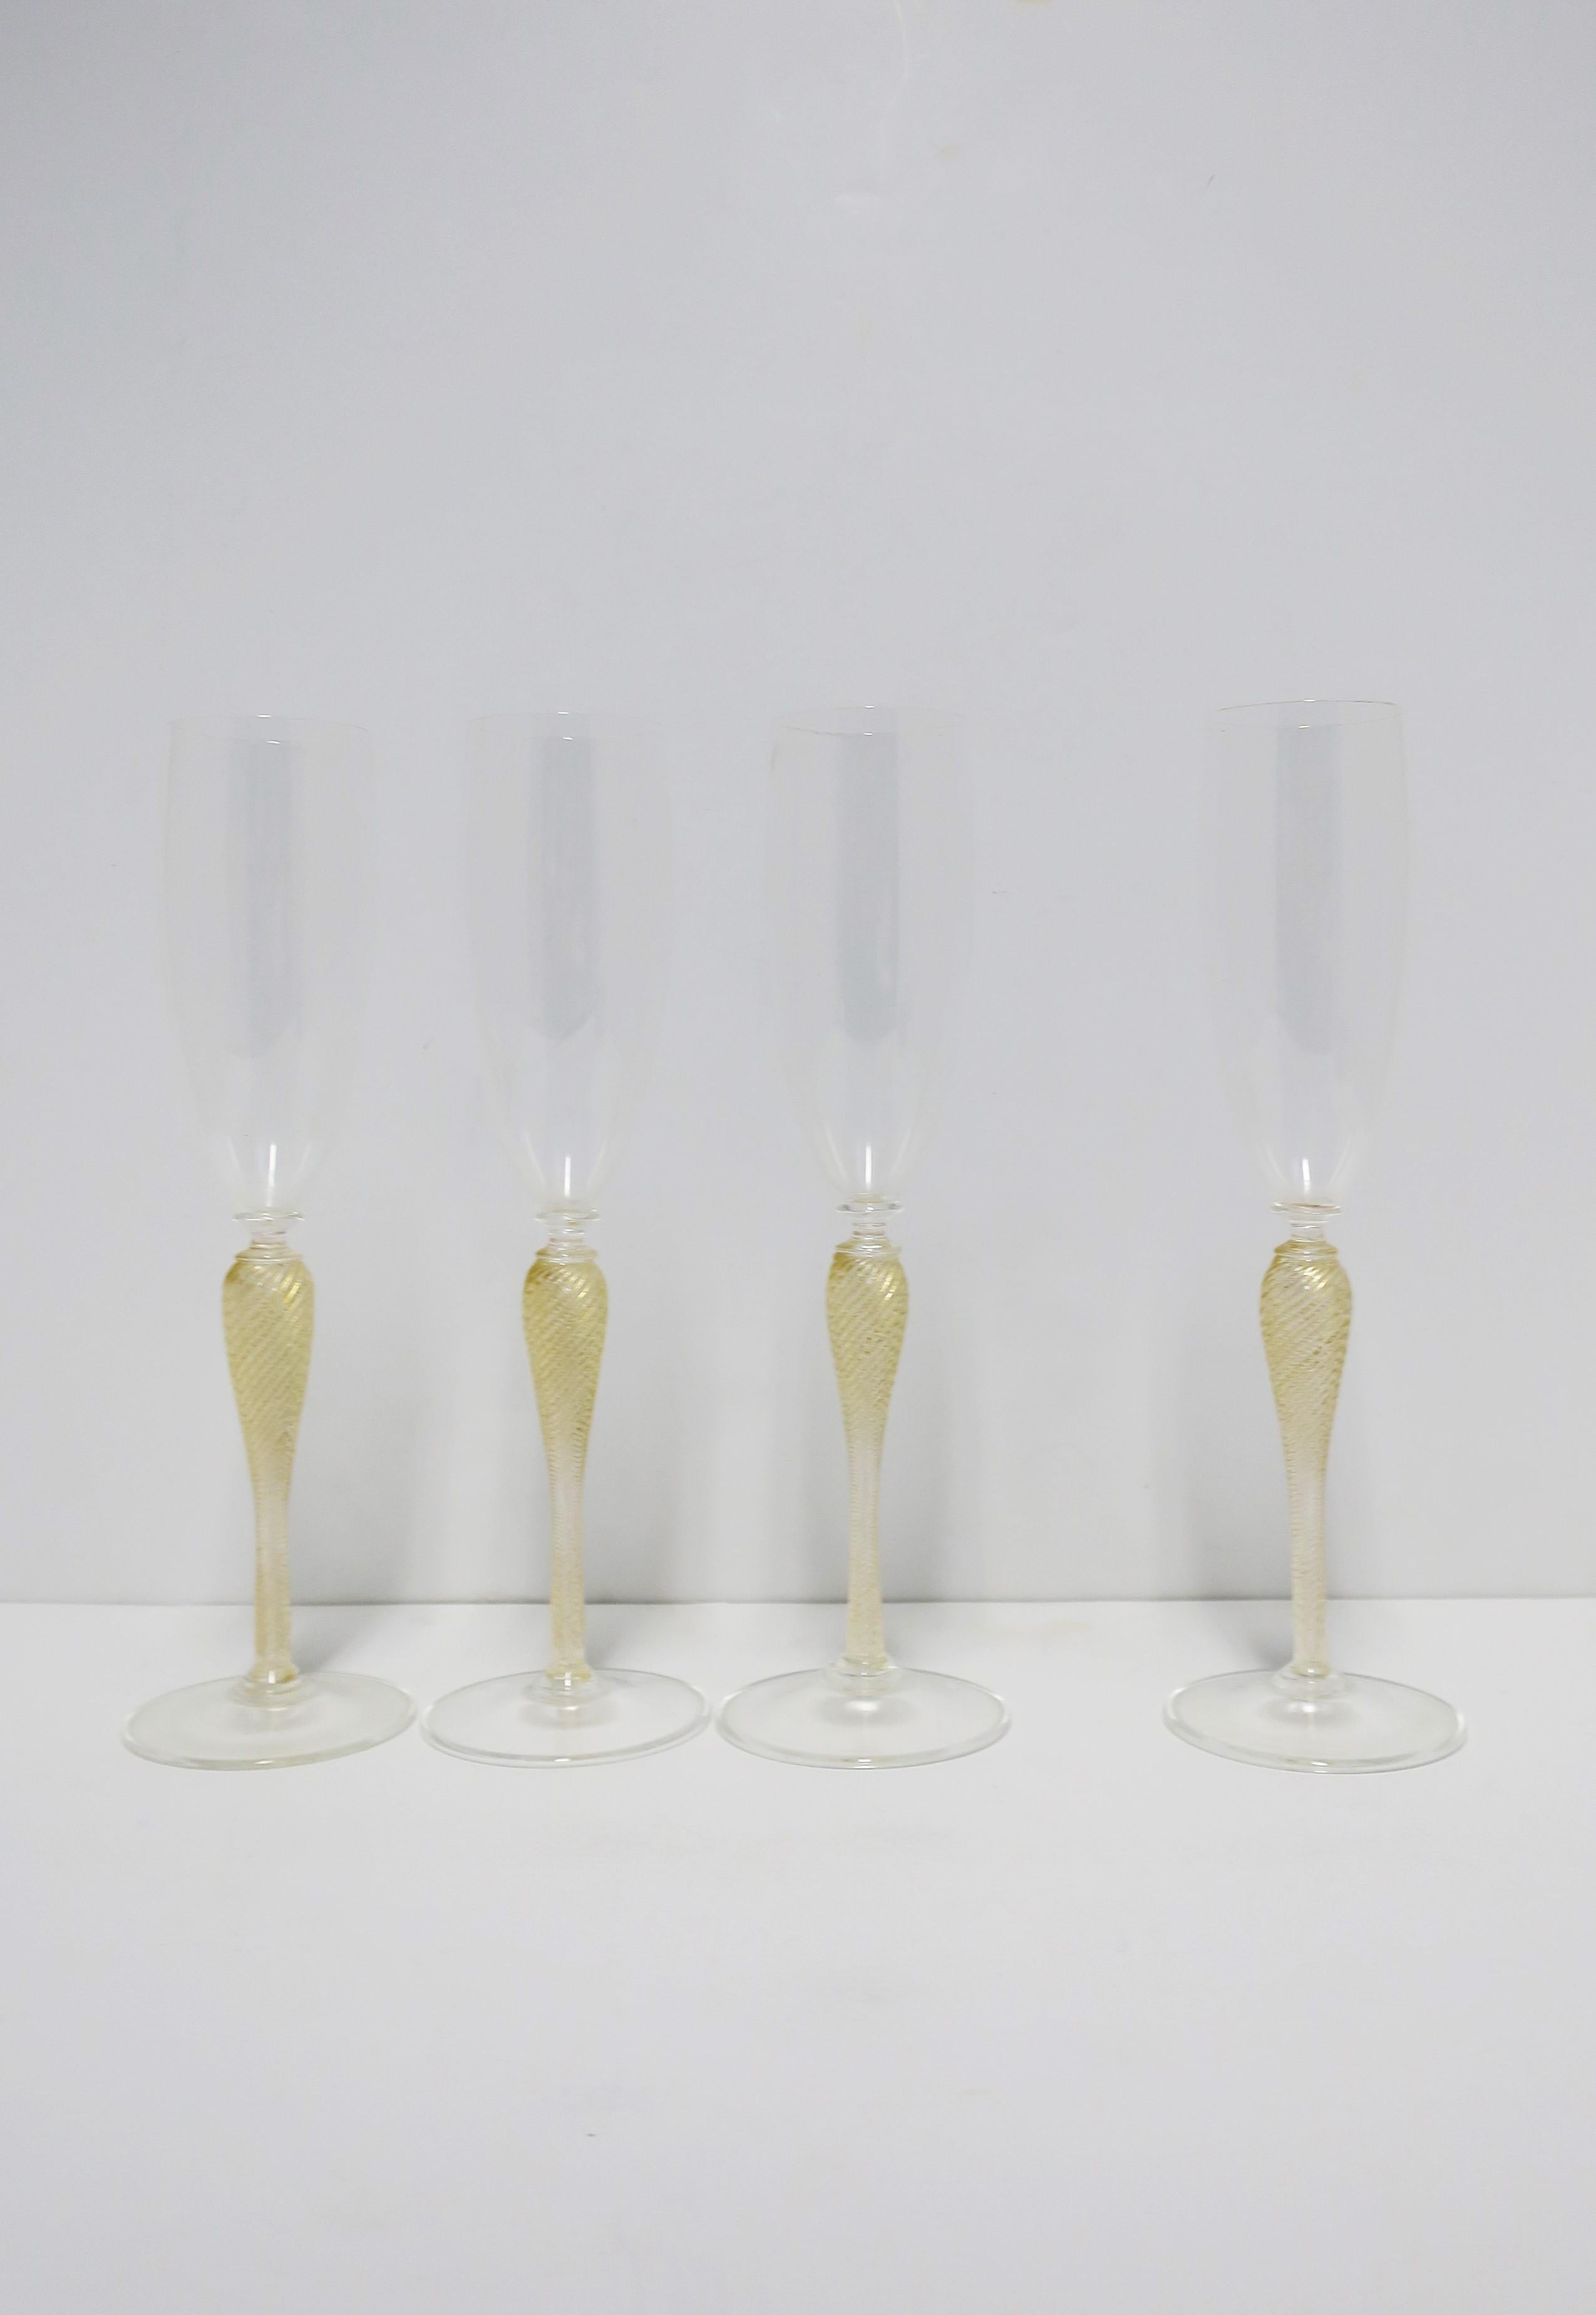 Hand-Crafted Italian Venetian Murano Gold Champagne Flute Glasses, Set of 4